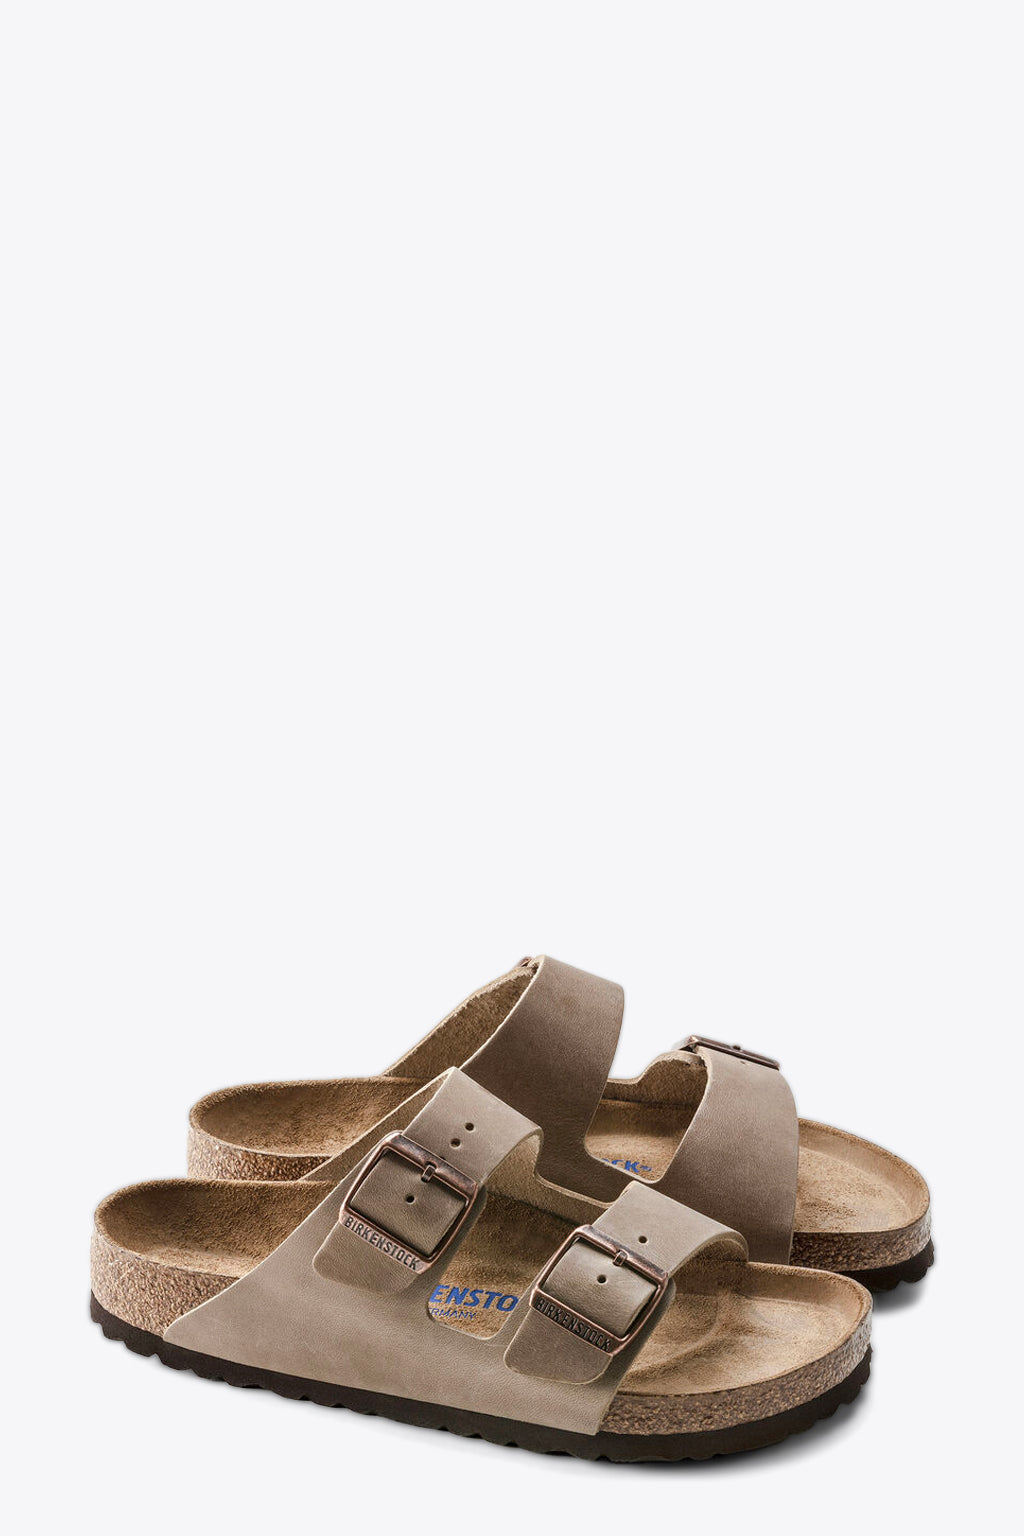 alt-image__Tobacco-brown-leather-sandal-with-buckles---Arizona